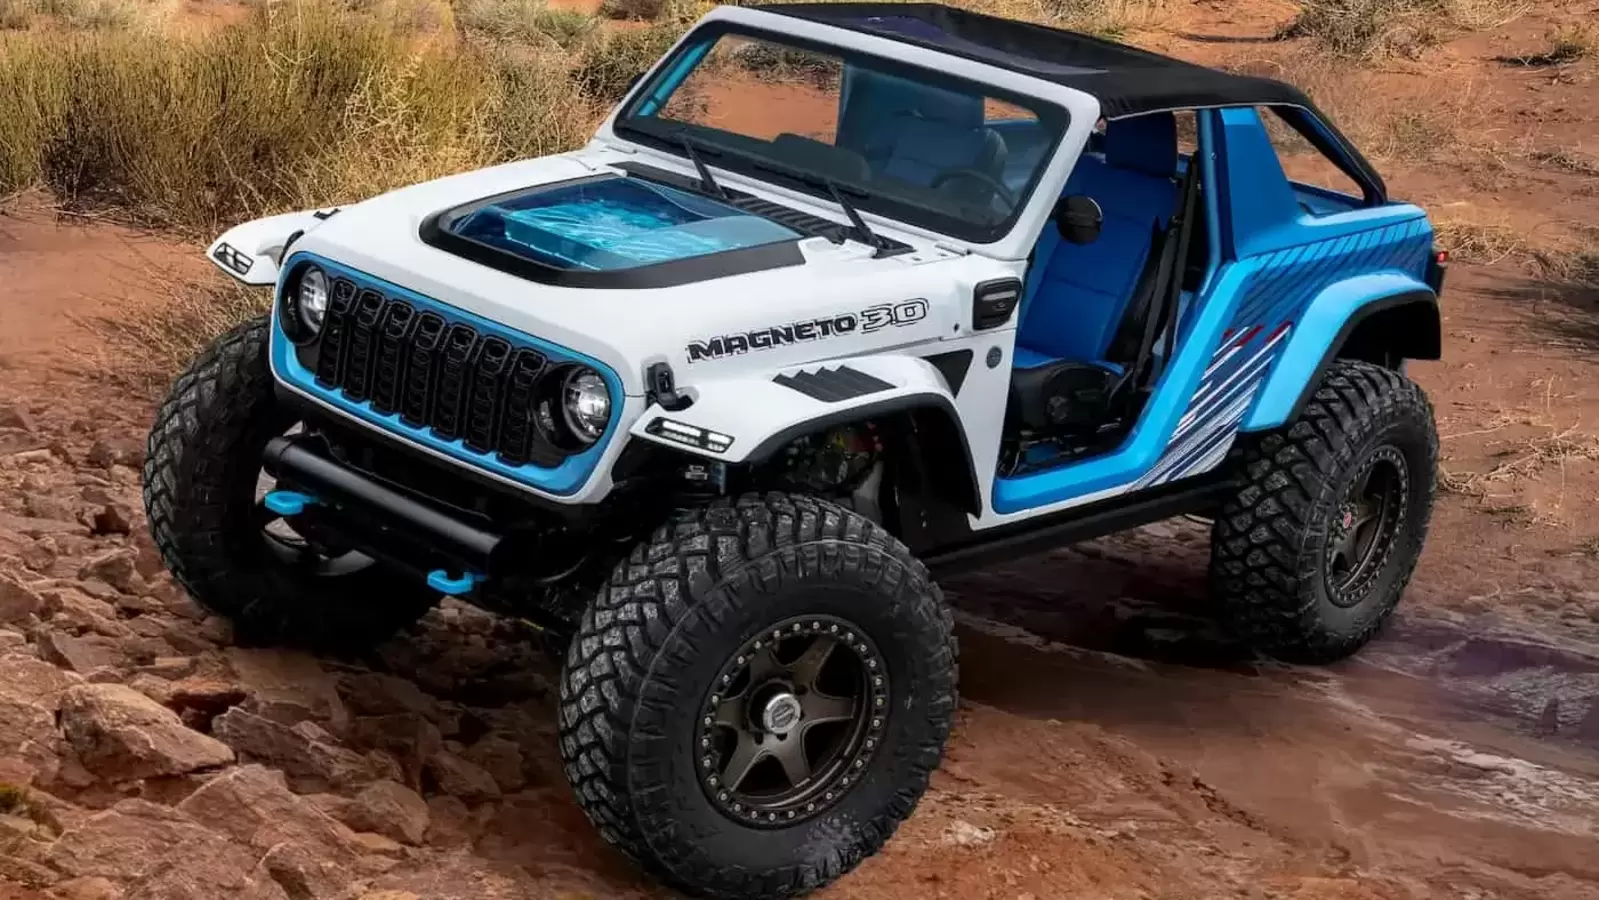 Jeep Wrangler Magneto 3.0 electric SUV concept breaks, pumps out 650 hp